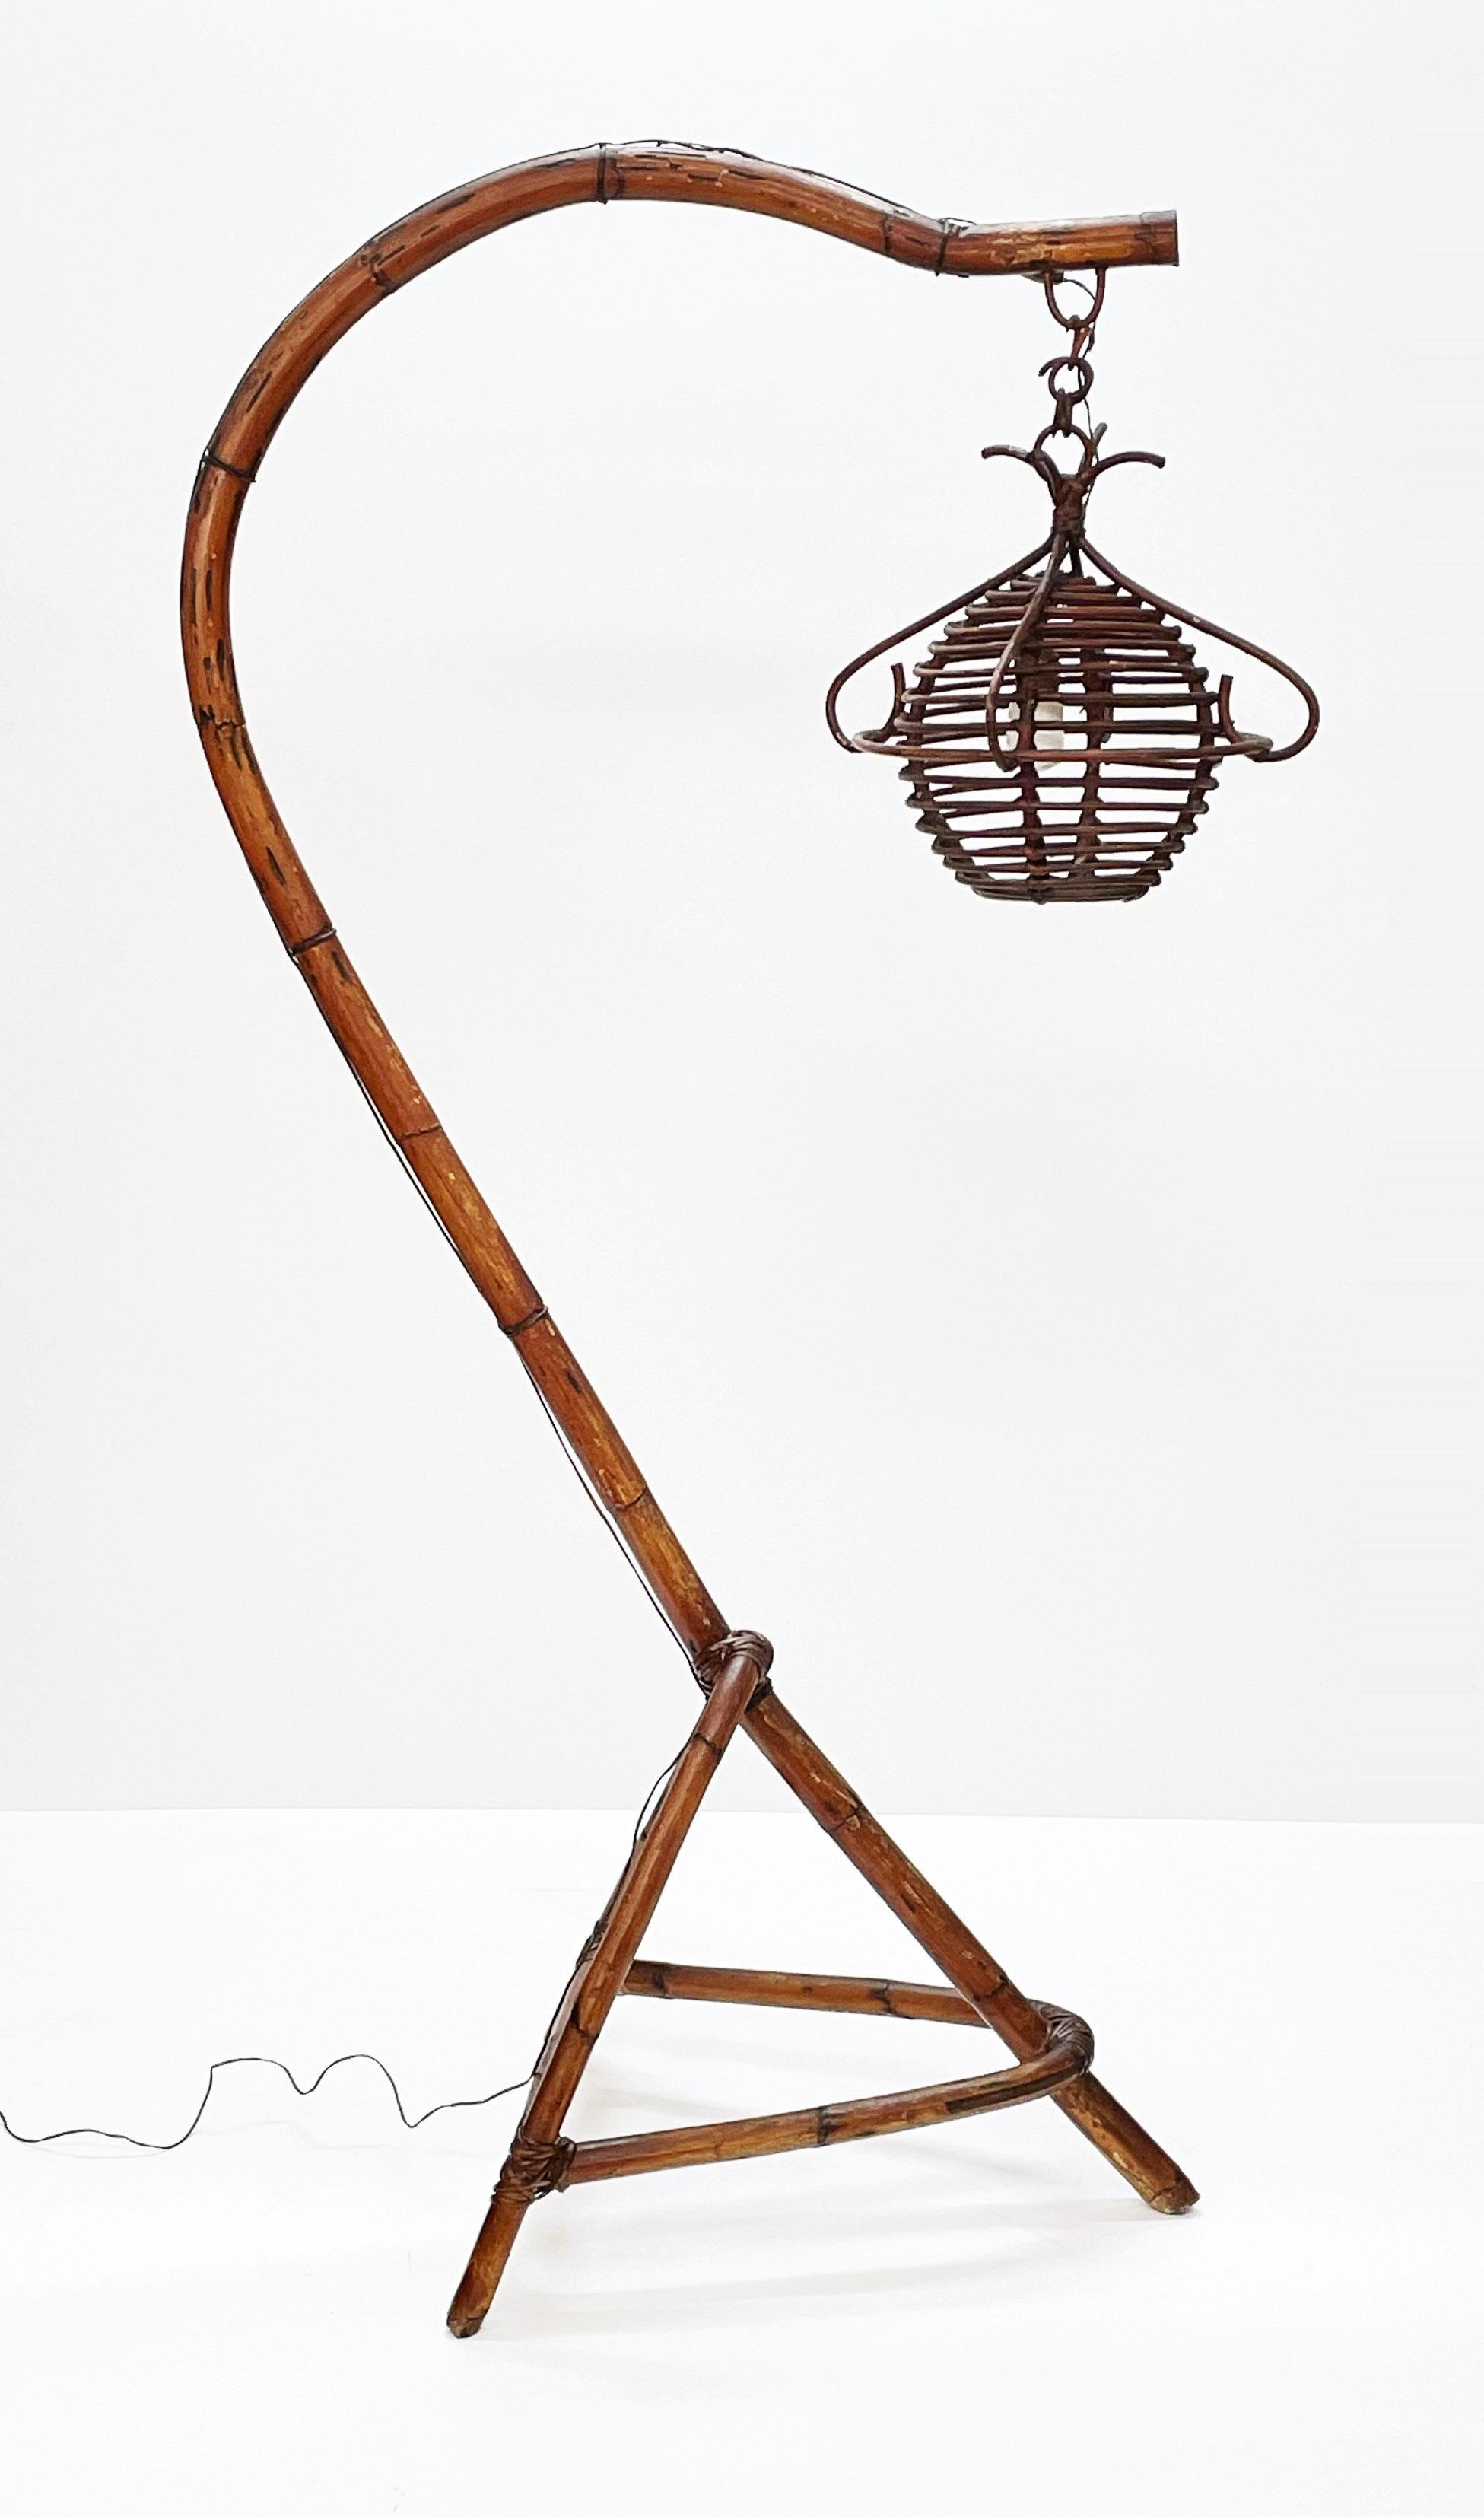 Midcentury Bamboo and Rattan Italian Floor Lamp with Tripod Base, 1950s For Sale 3